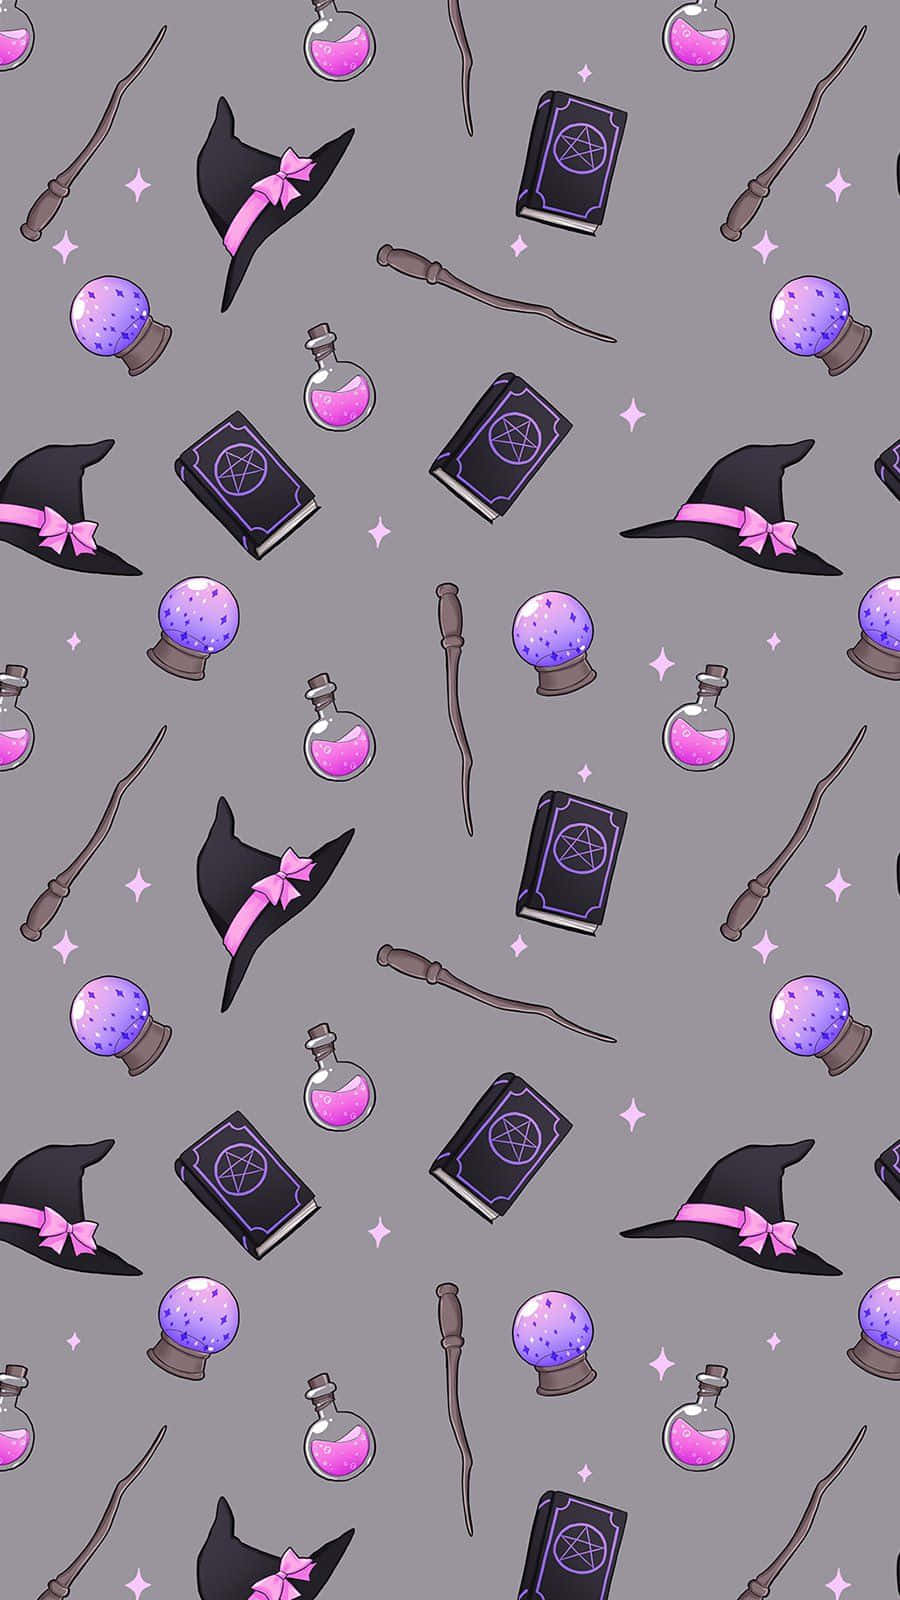 "Cast a spell of style this Halloween!" Wallpaper